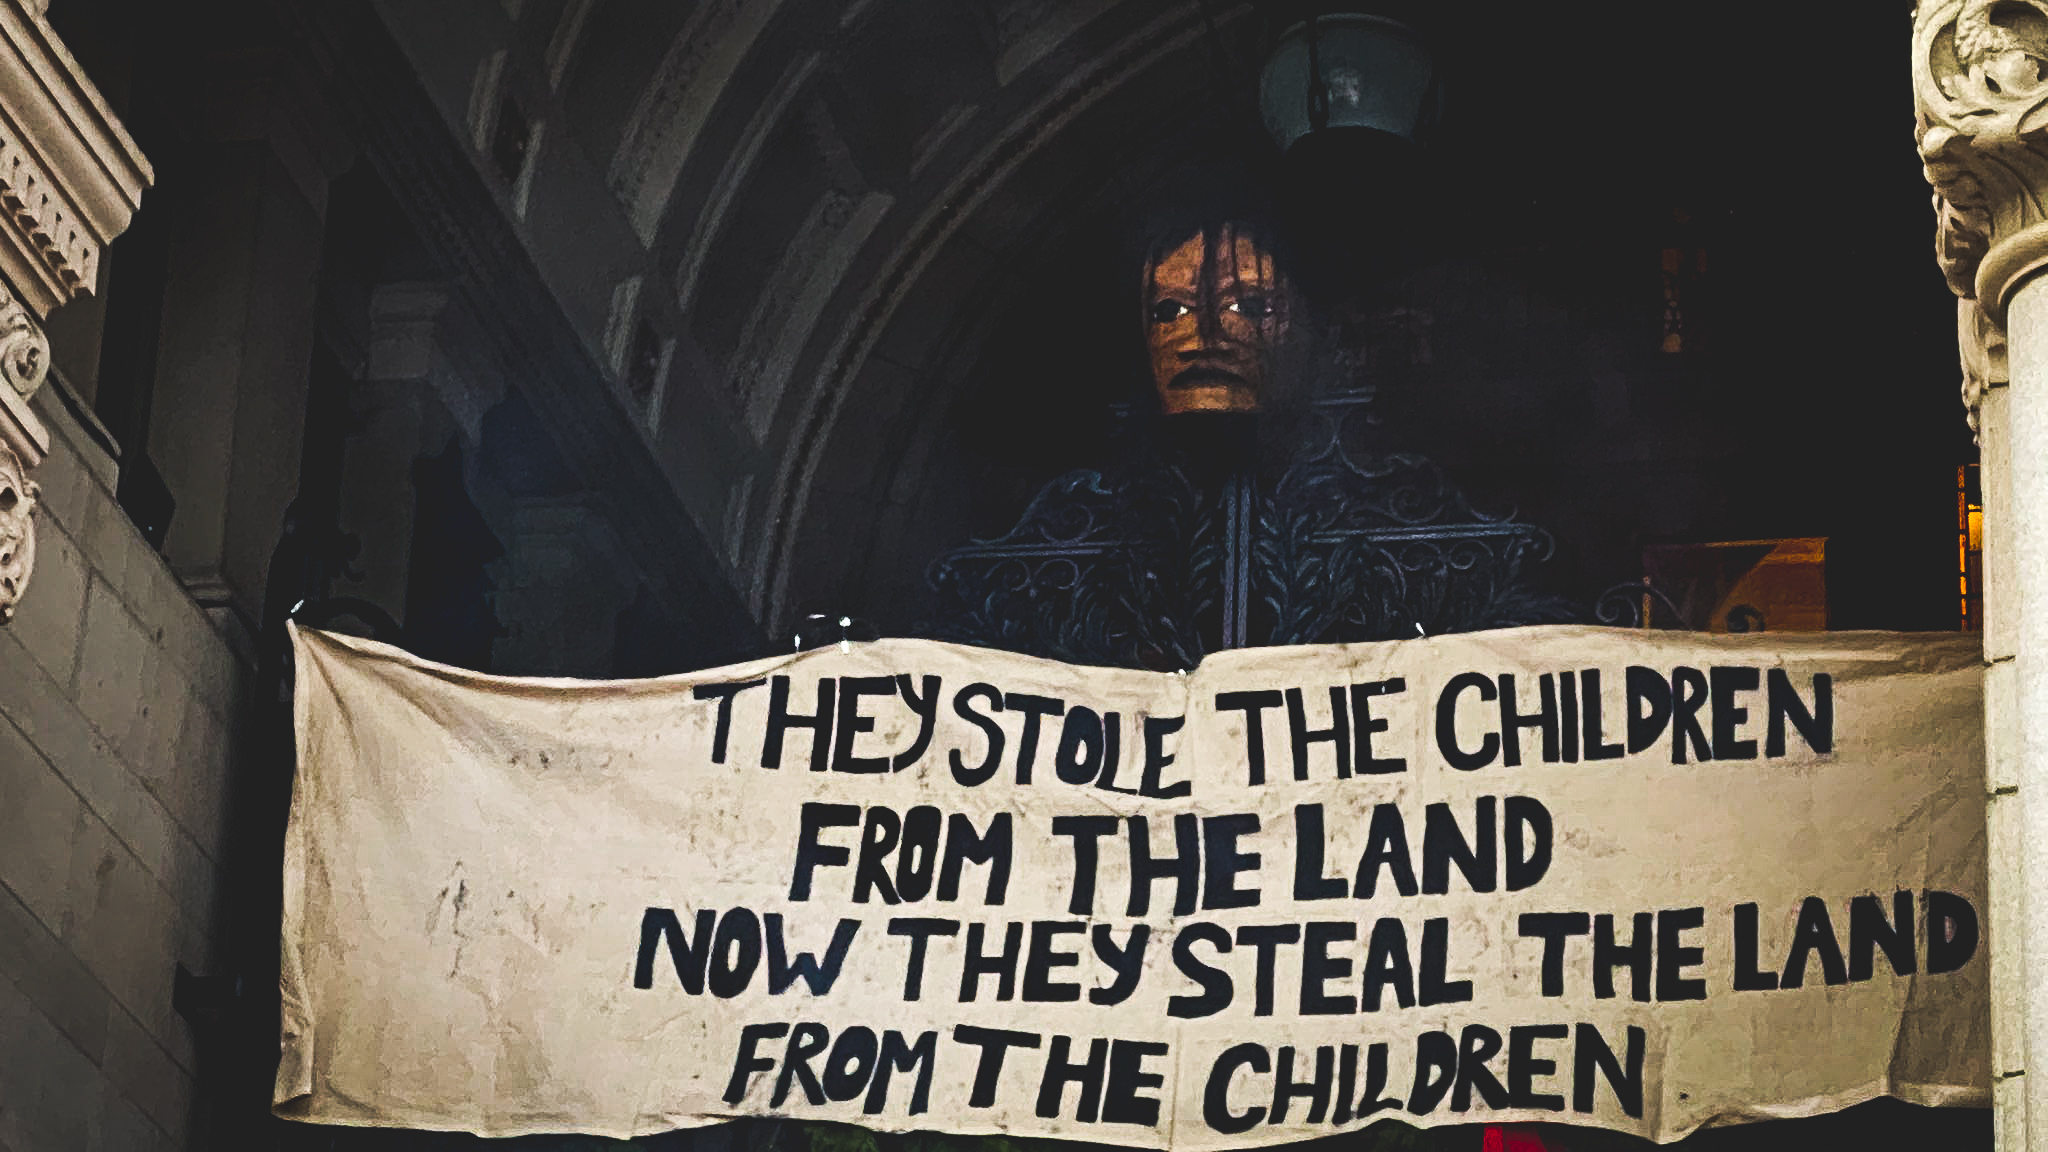 They stole the children from the land, now they steal the land from the children sign